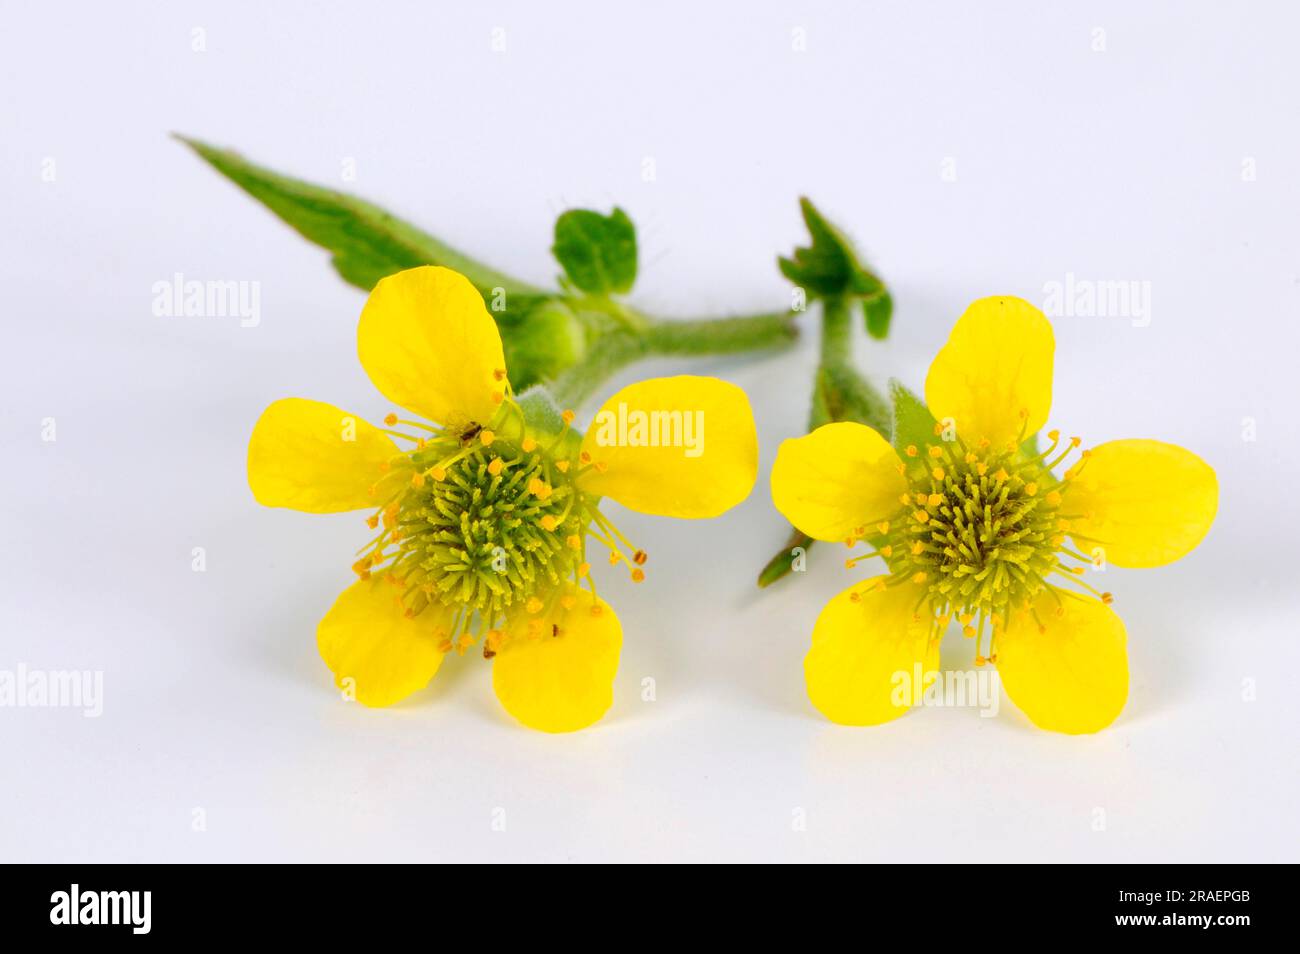 Wood avens (Geum urbanum), Benedicte root, buschnelk root, Hail to all the world, man's strength root, Marz root, wall clove root, nail root, Narden Stock Photo